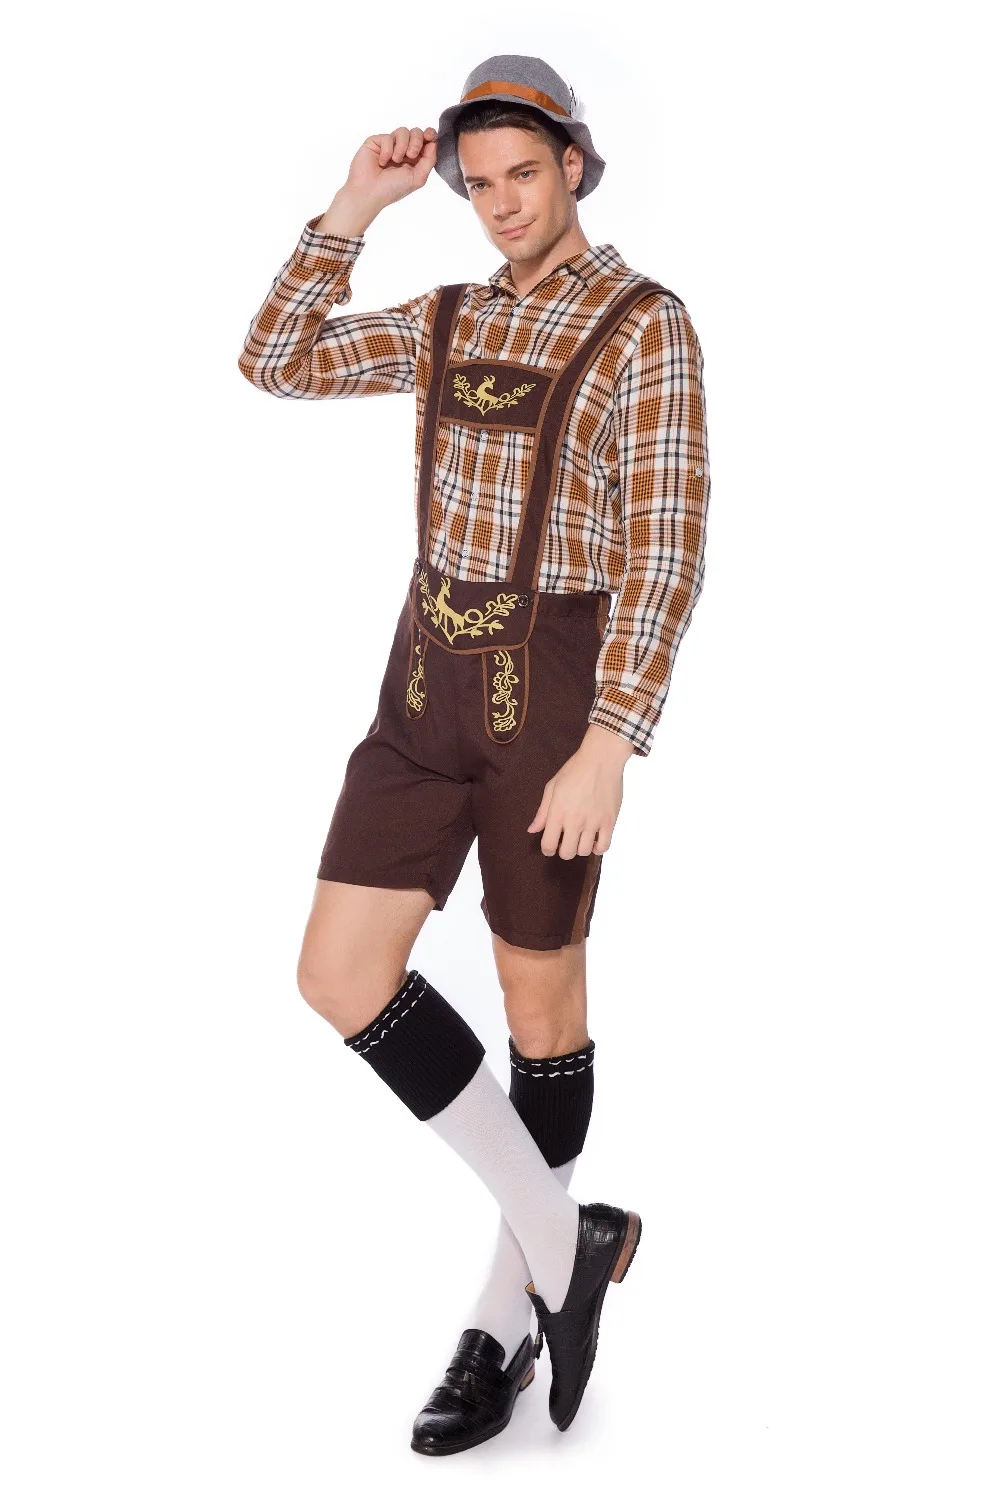 Traditional Adult Men's Oktoberfest Costumes German Bavarian Beer Male Cosplay Halloween Octoberfest Festival Party Clothes